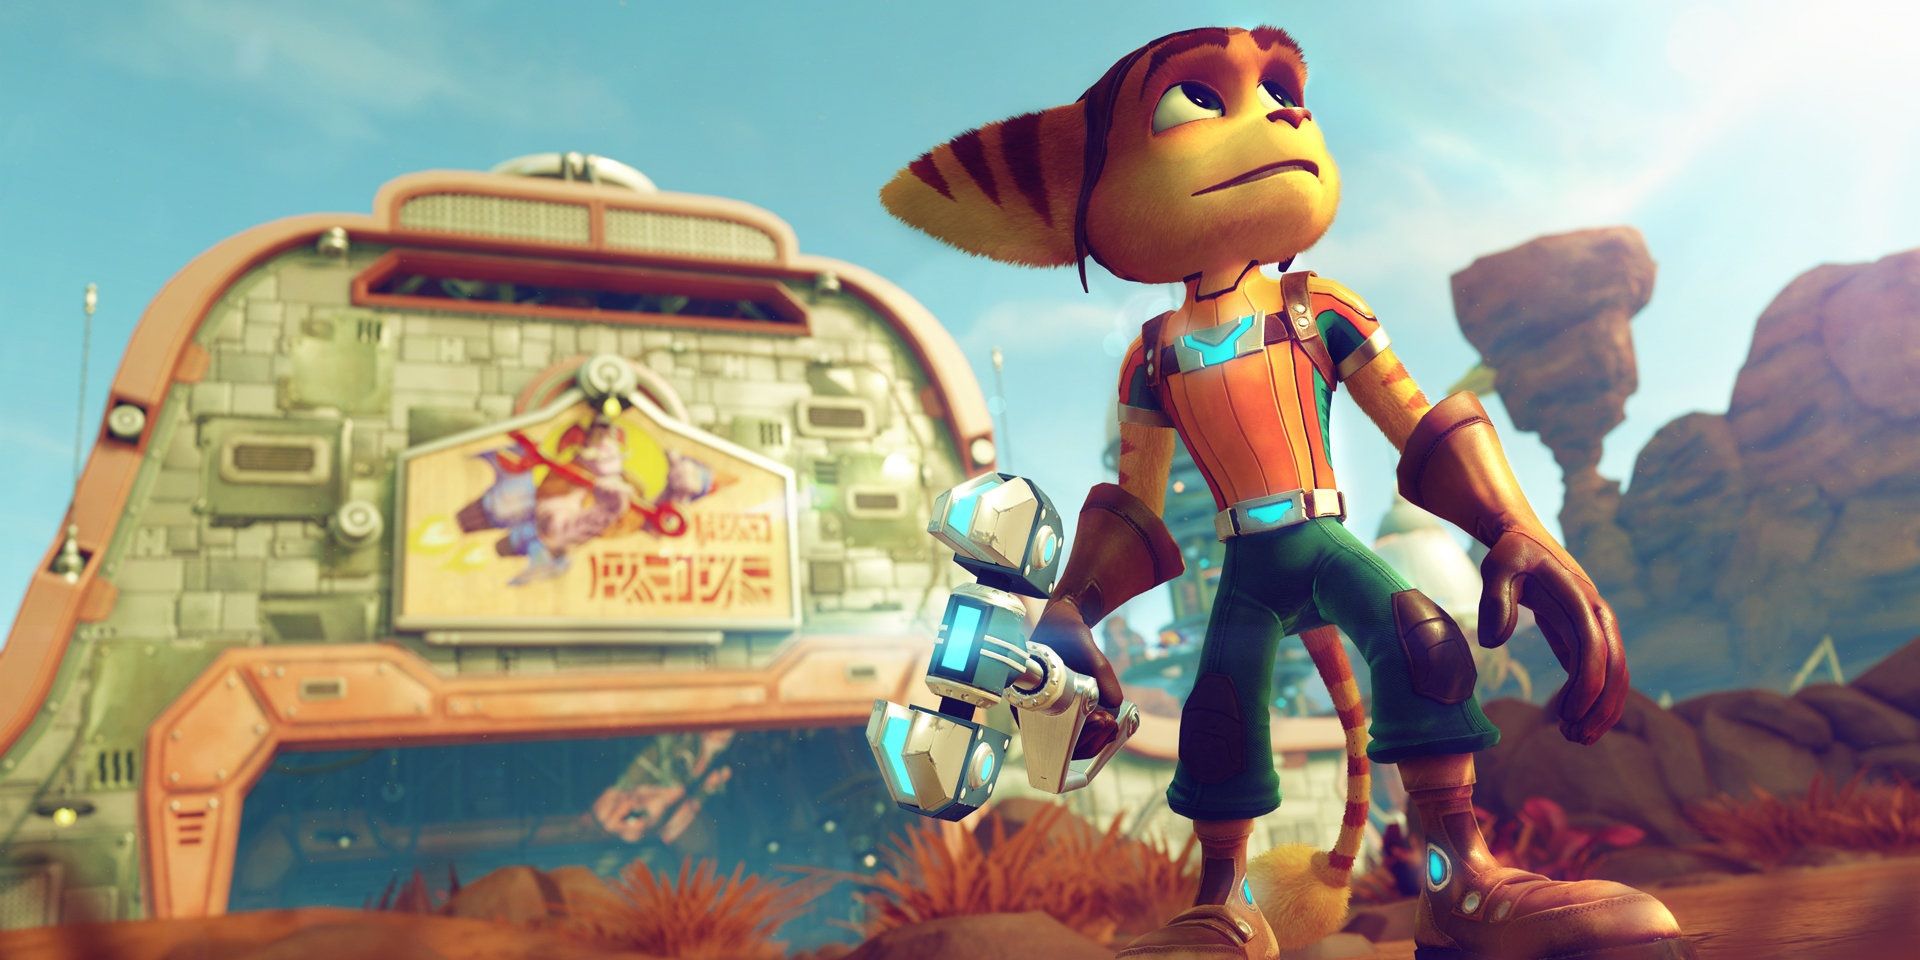 Ratchet & Clank screenshot from the 2016 remake of the title for PlayStation 4.